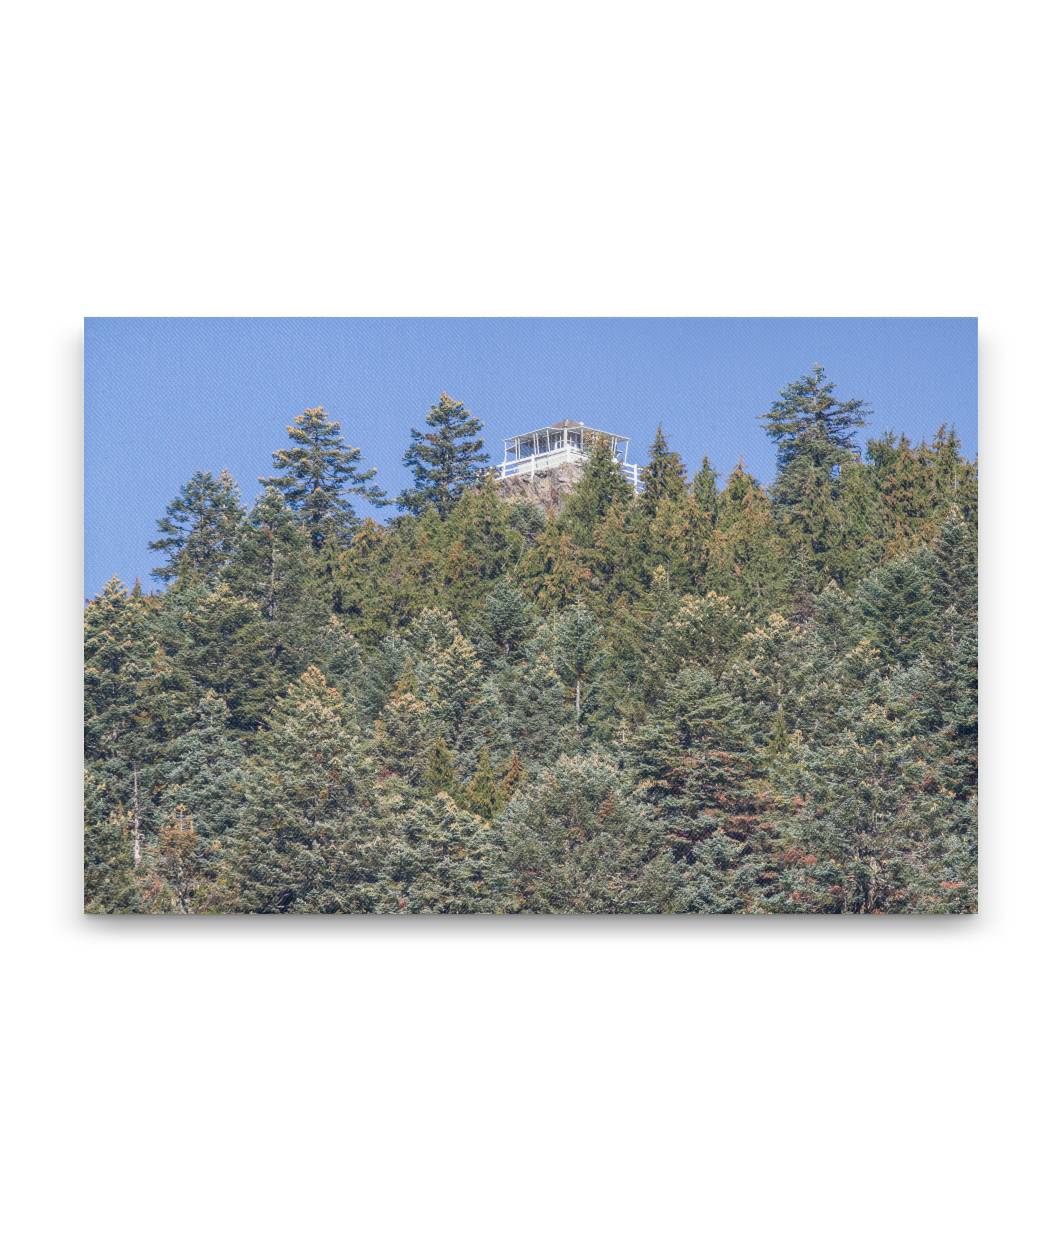 Carpenter Mountain Fire Lookout With Mountain Hemlocks and Noble Firs From Carpenter Saddle, Oregon, USA